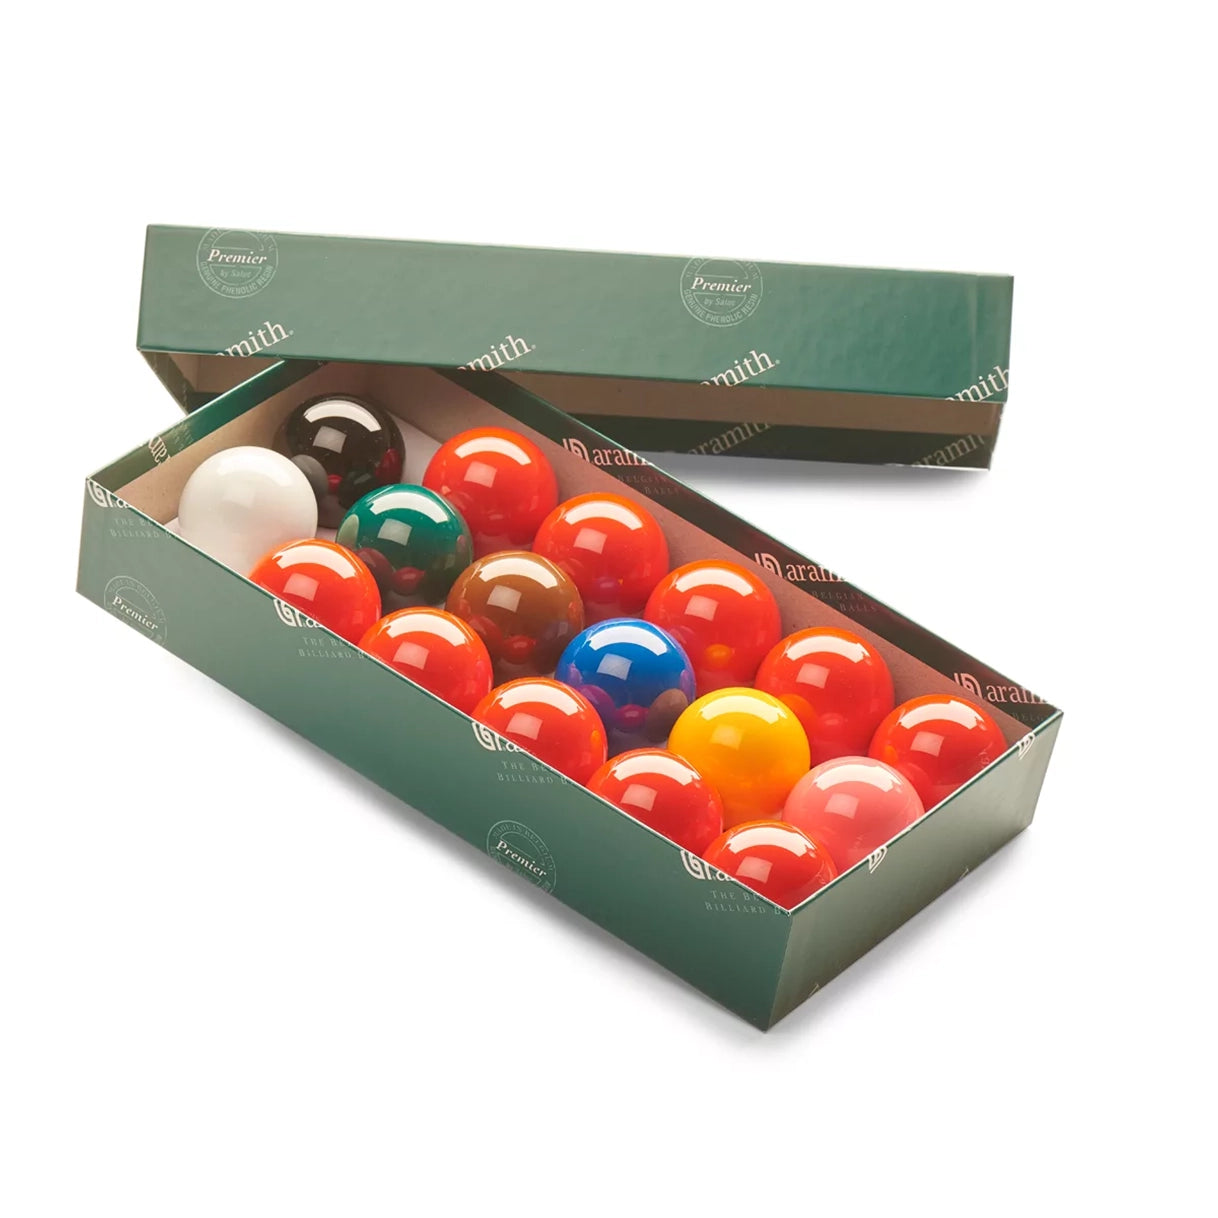 Aramith Premier Snooker Ball Sets with 10 Reds. Open box view